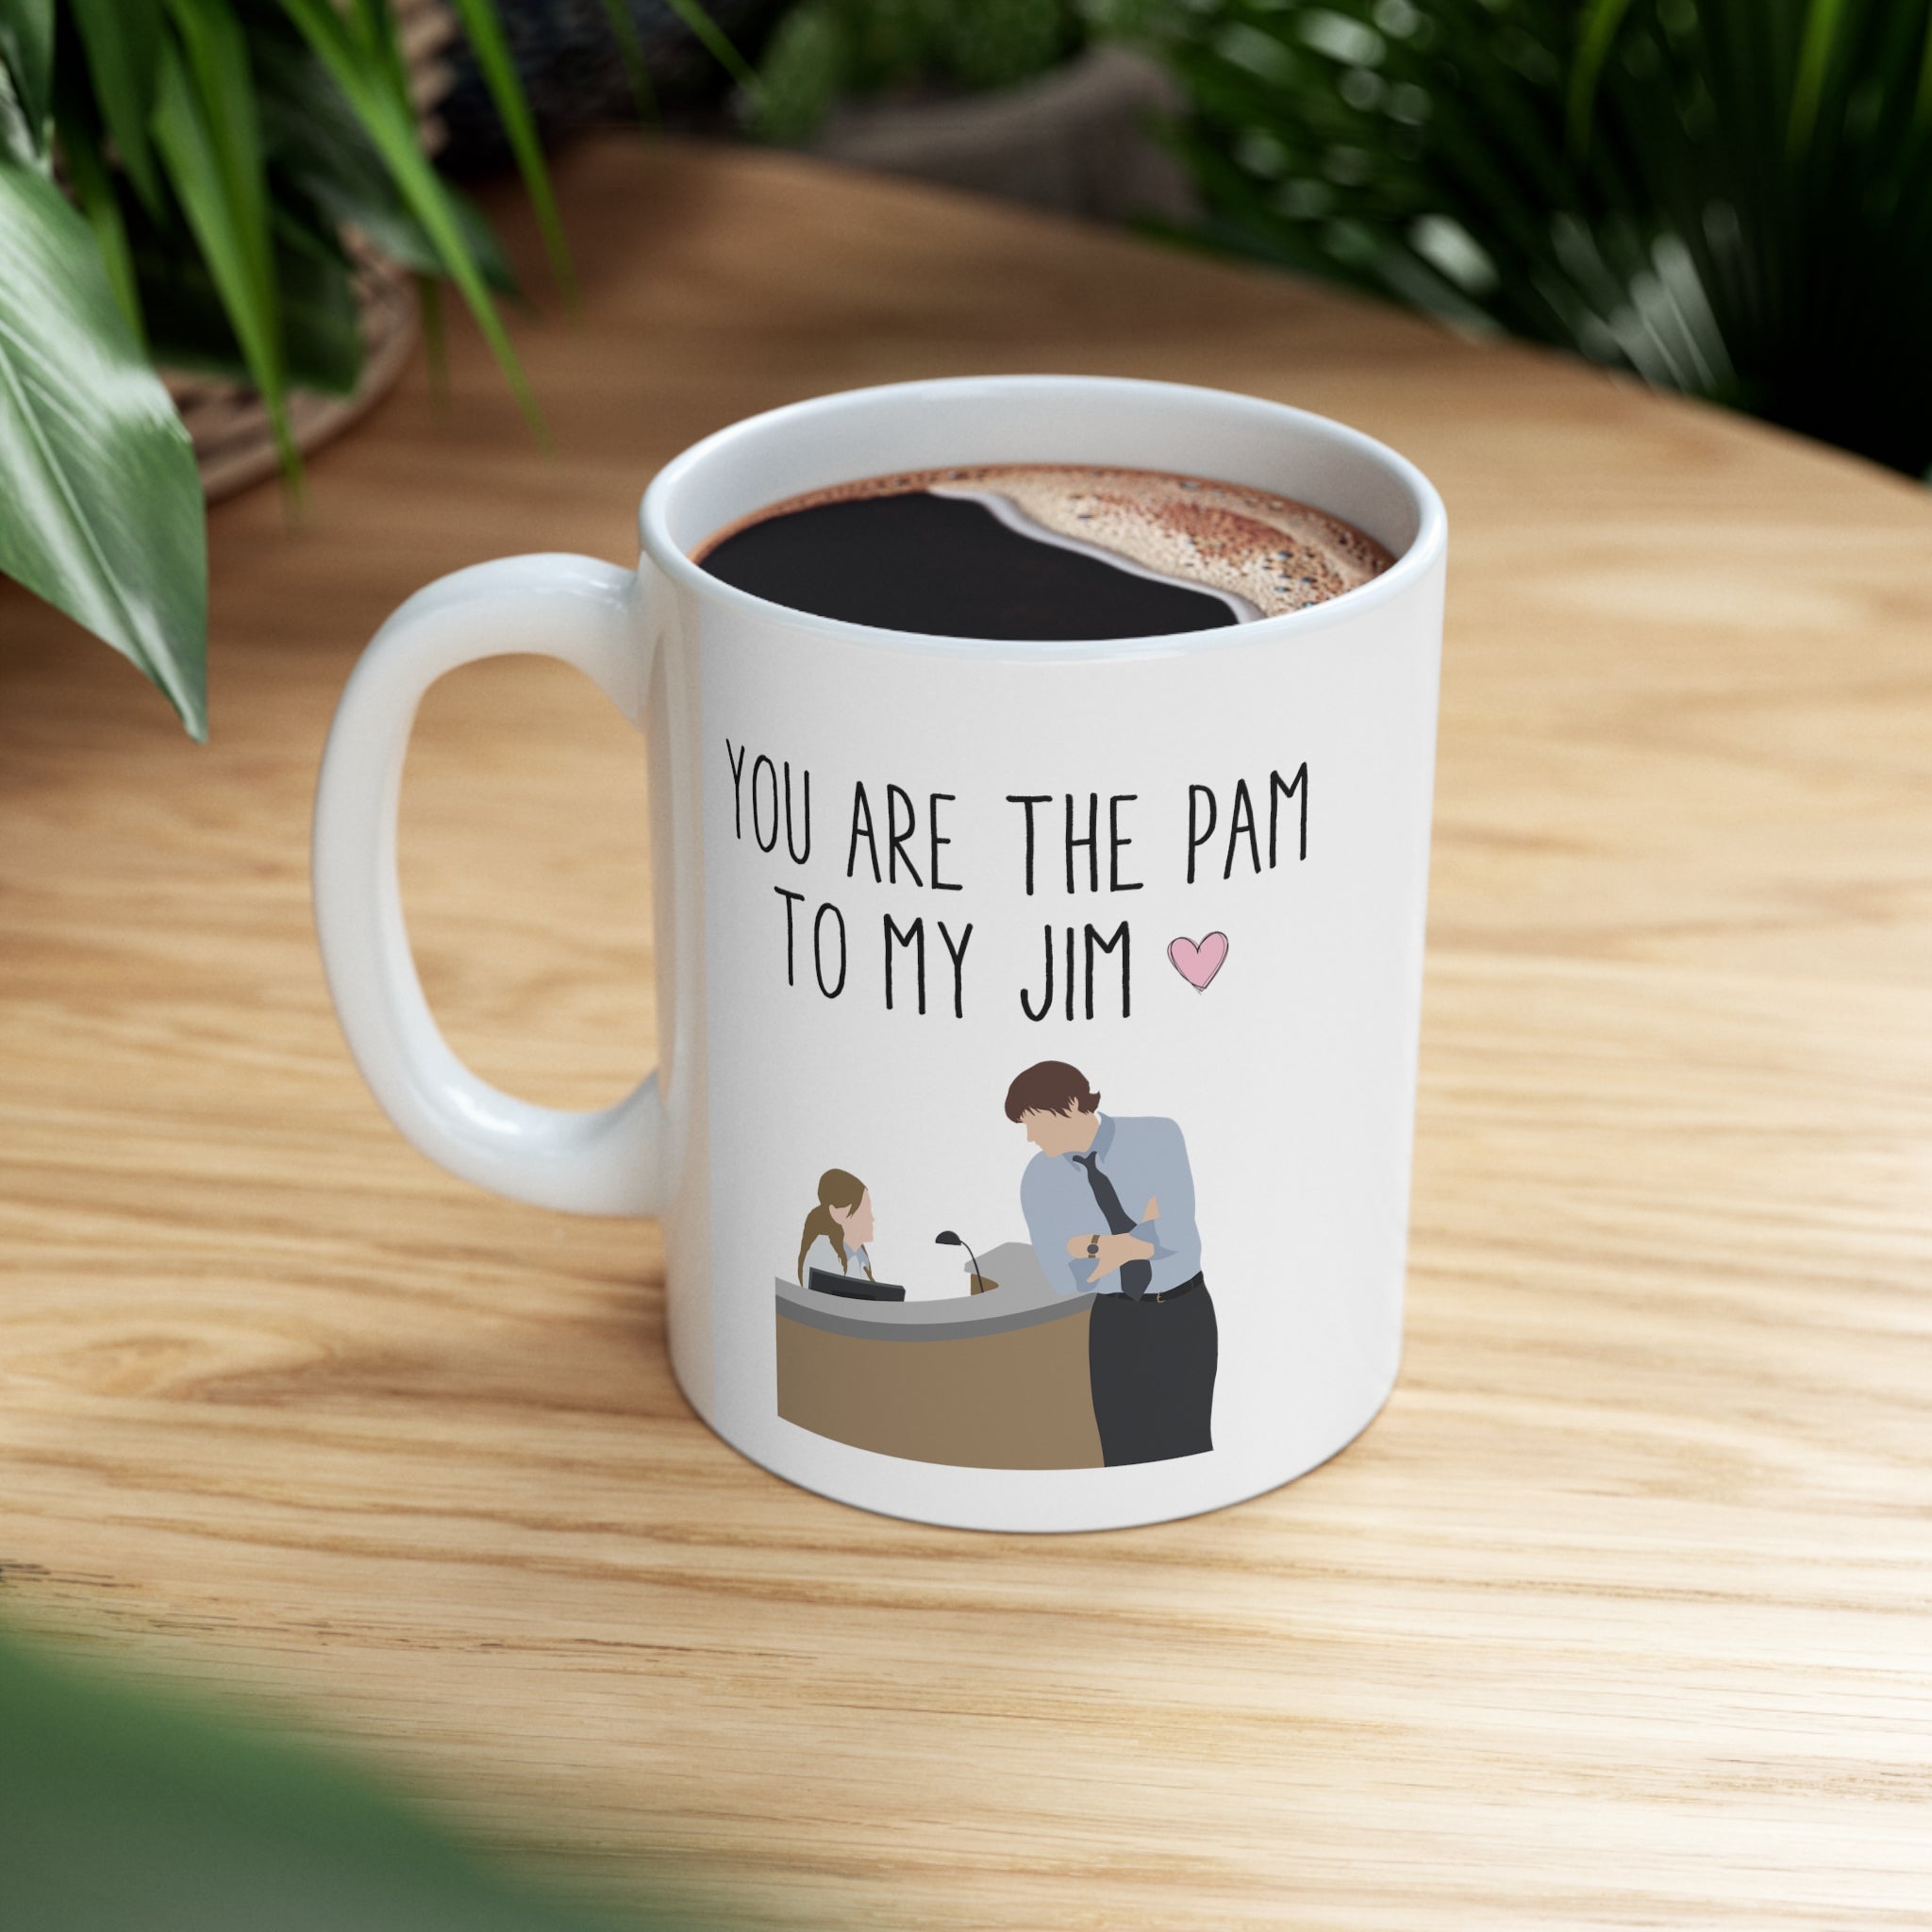 You are the Pam to my Jim - Mug